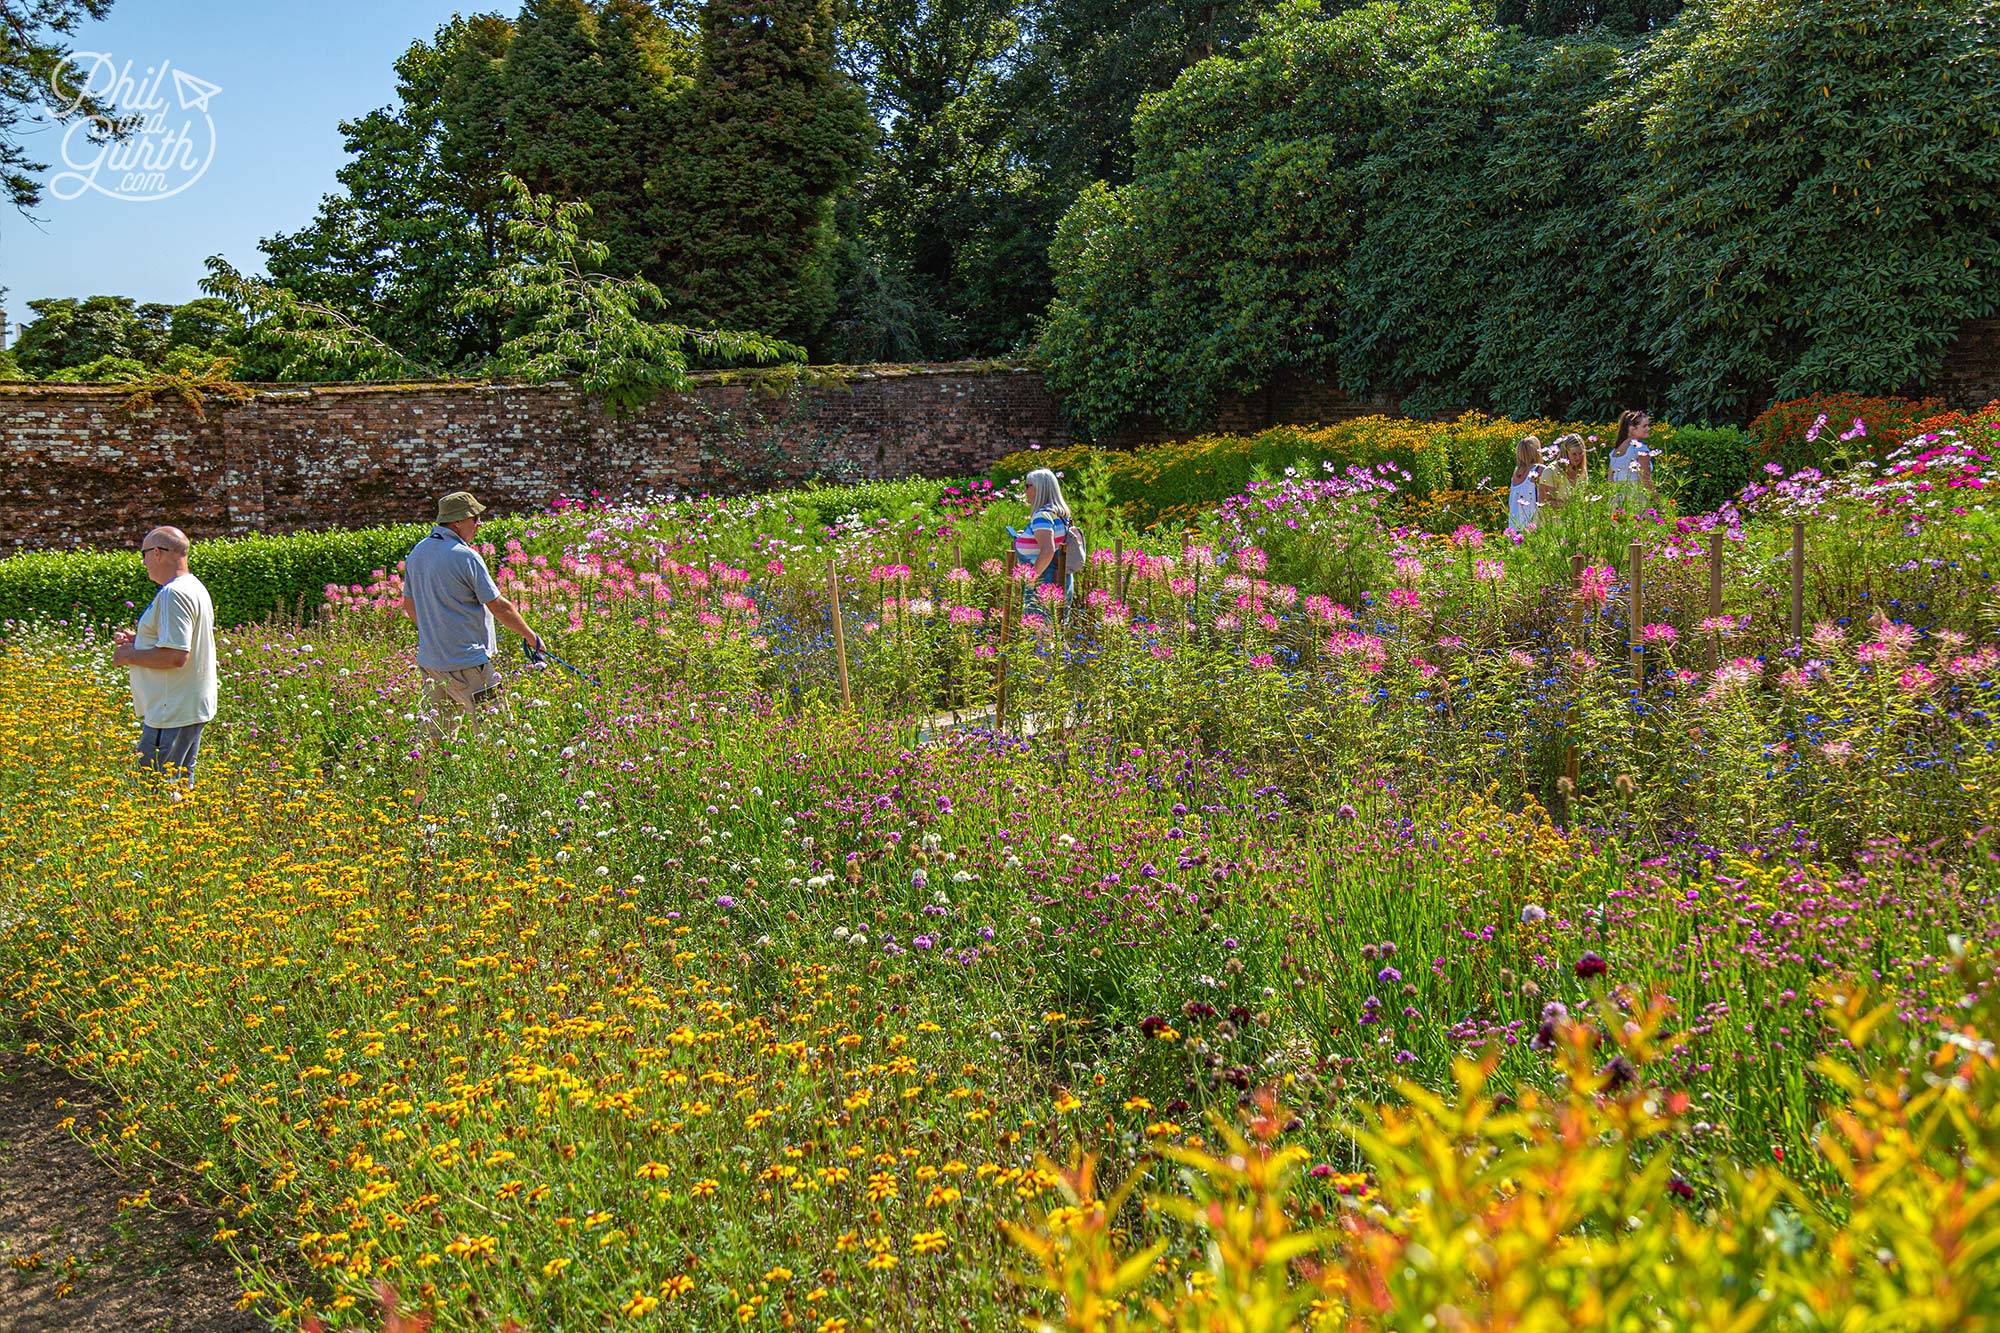 A paradise for gardeners, couples and families after a tranquil day out